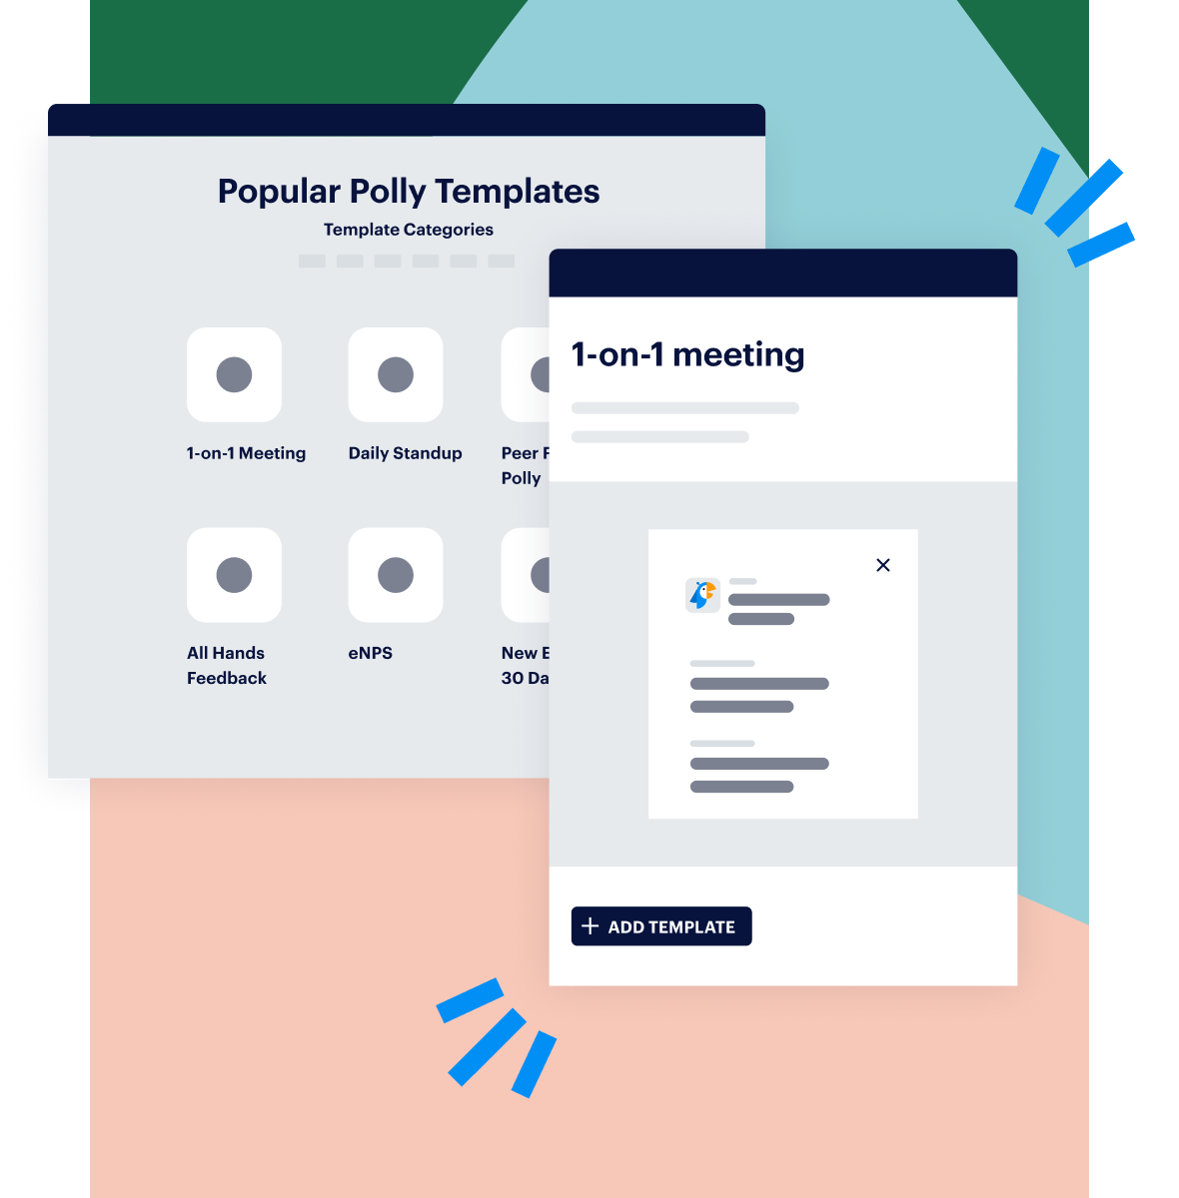 template categories and highlighted template for one-on-one meeting